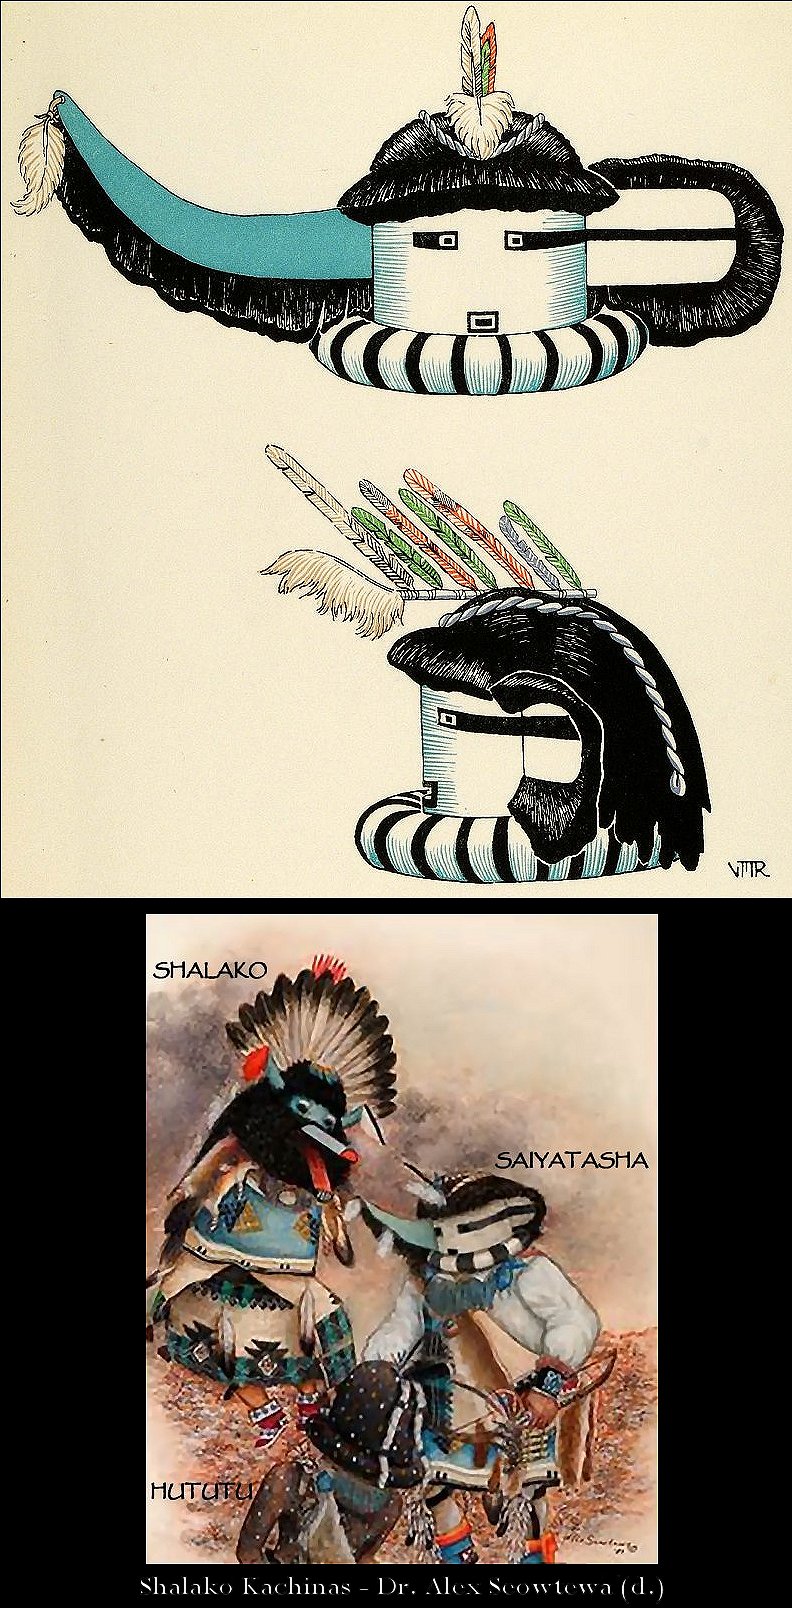 Zuni Spirits is proud to represent a variety of Zuni fetish carvers, including Russell Shack!